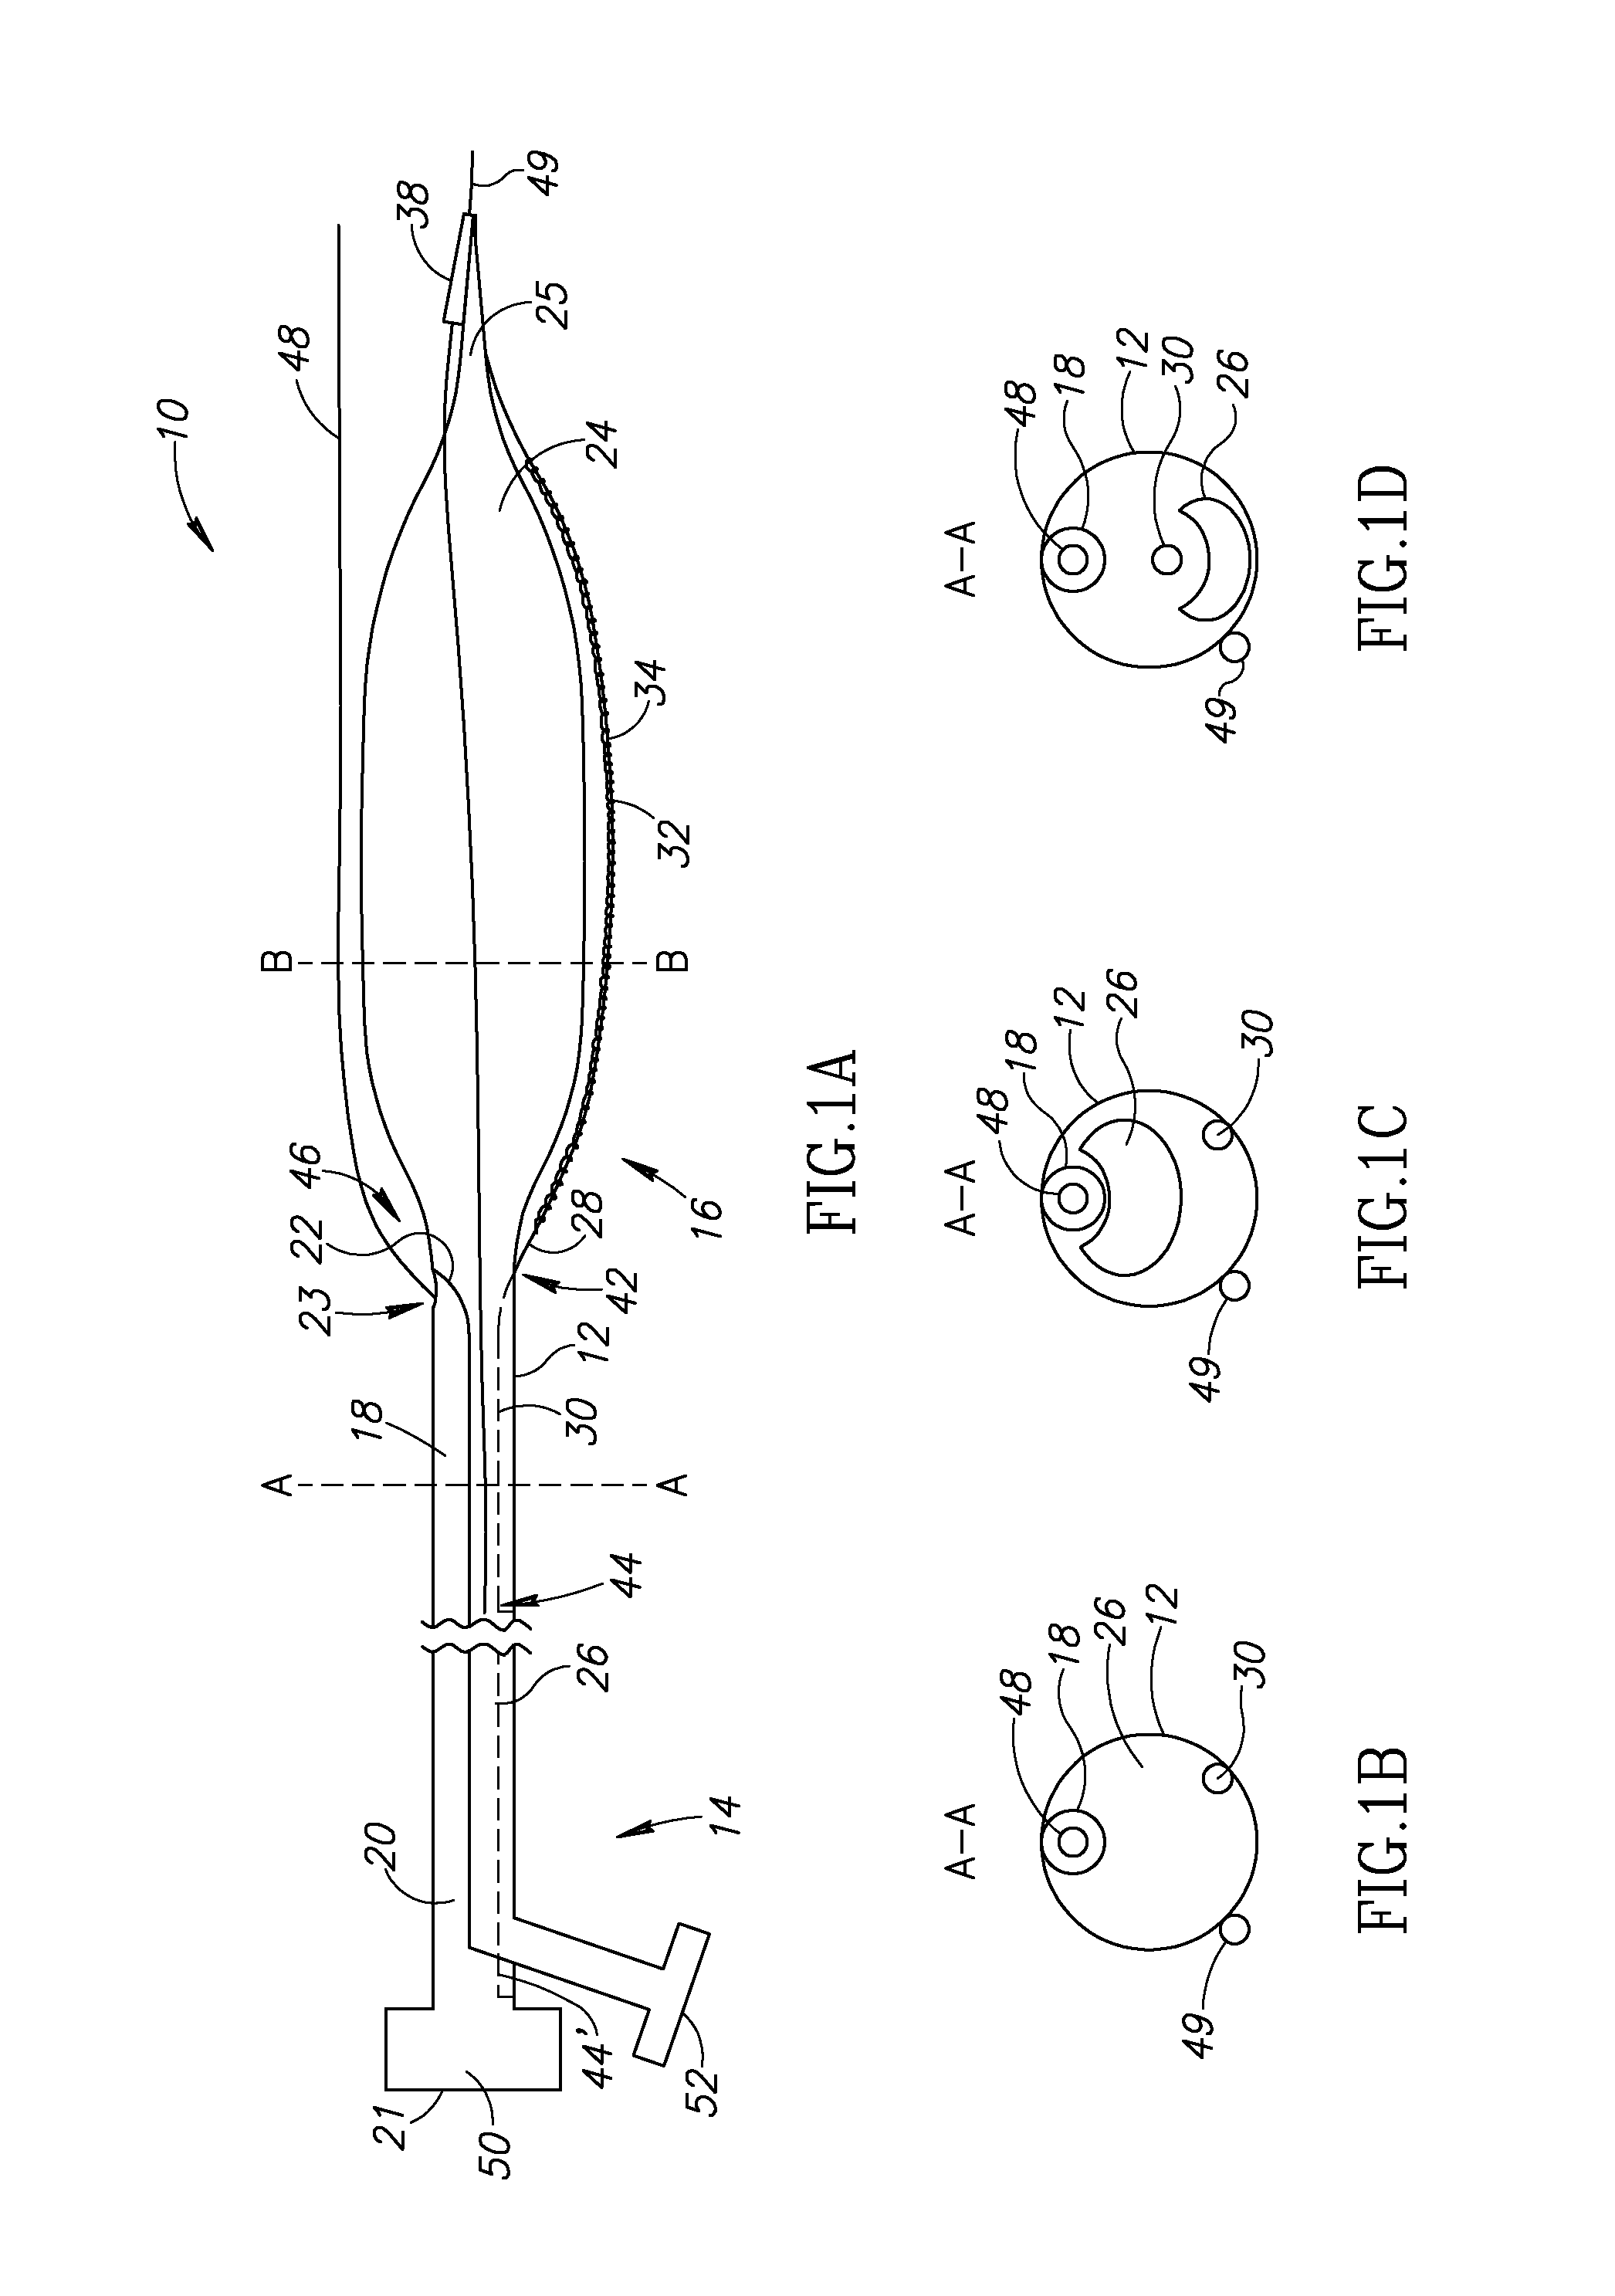 Systems and methods for treating a vessel using focused force